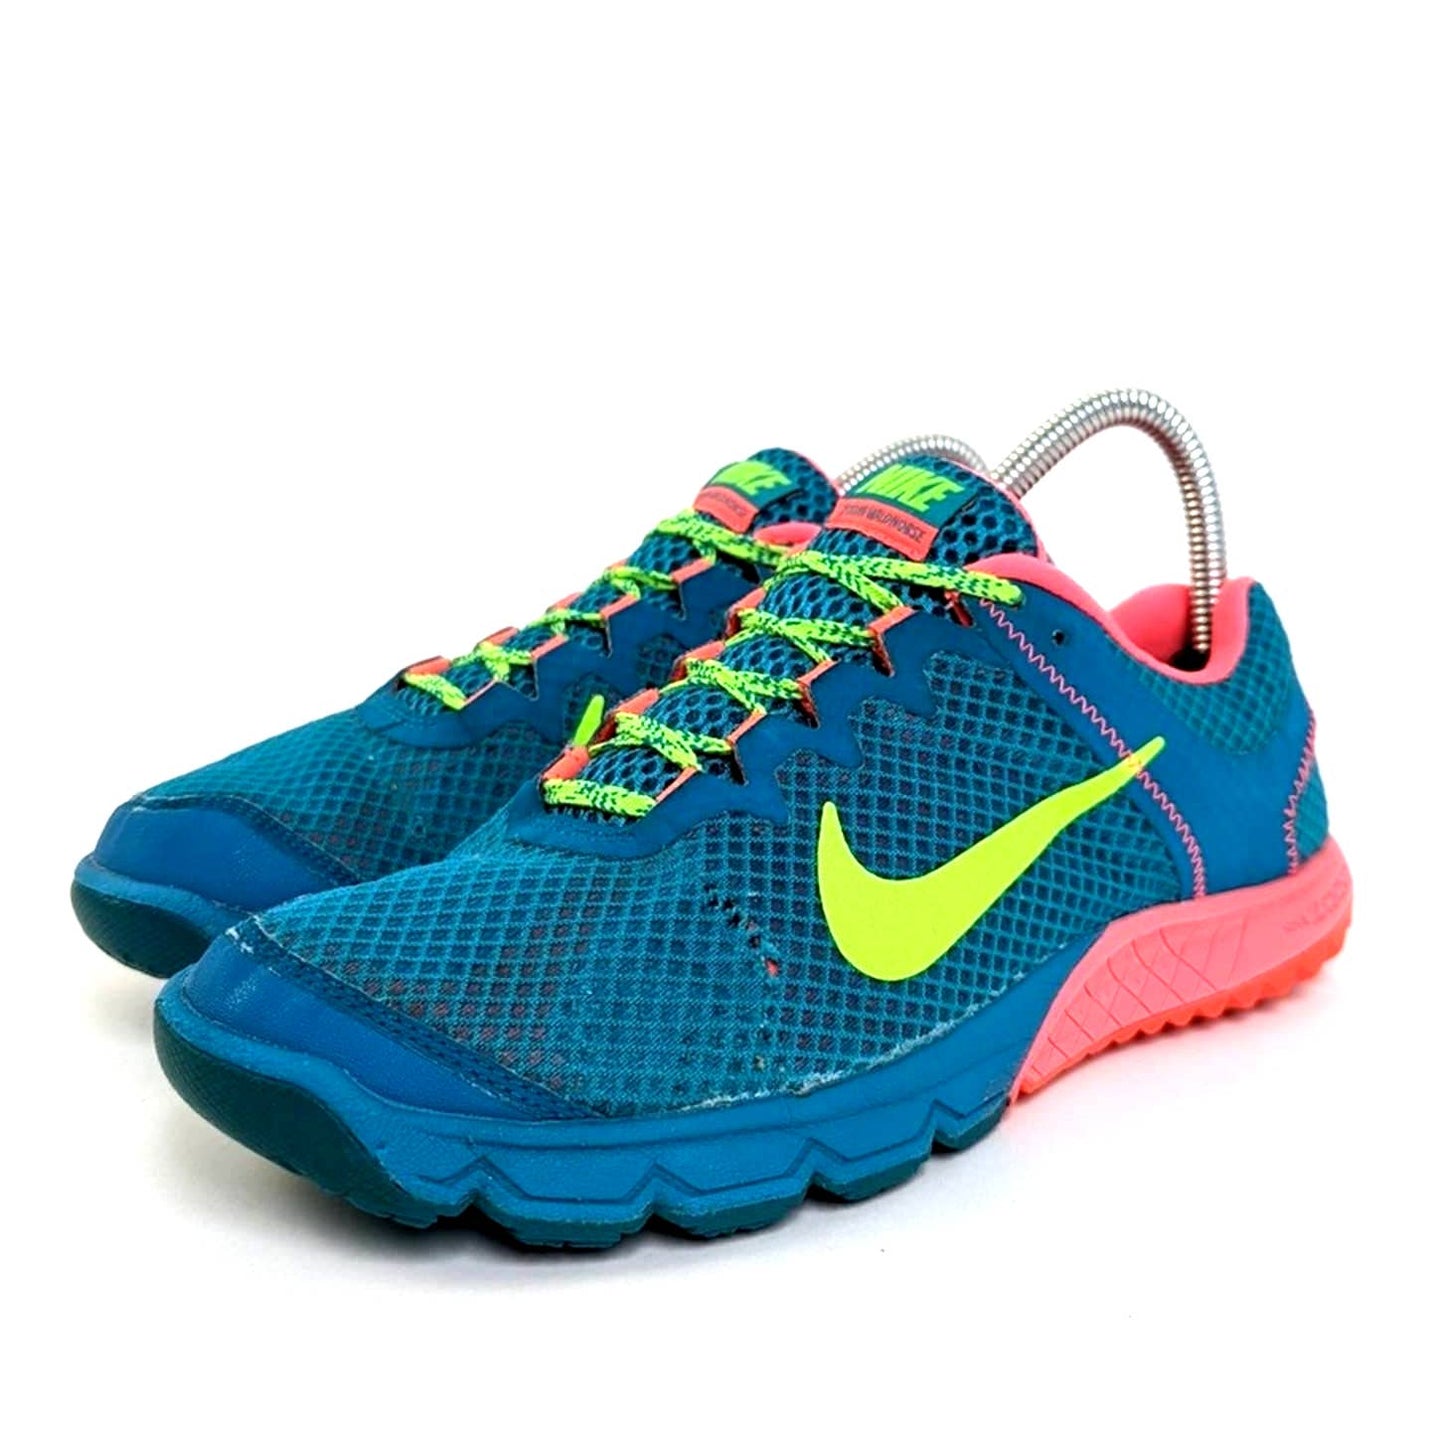 Nike Zoom Terra Wildhorse Cotton Candy Running Shoes - 9